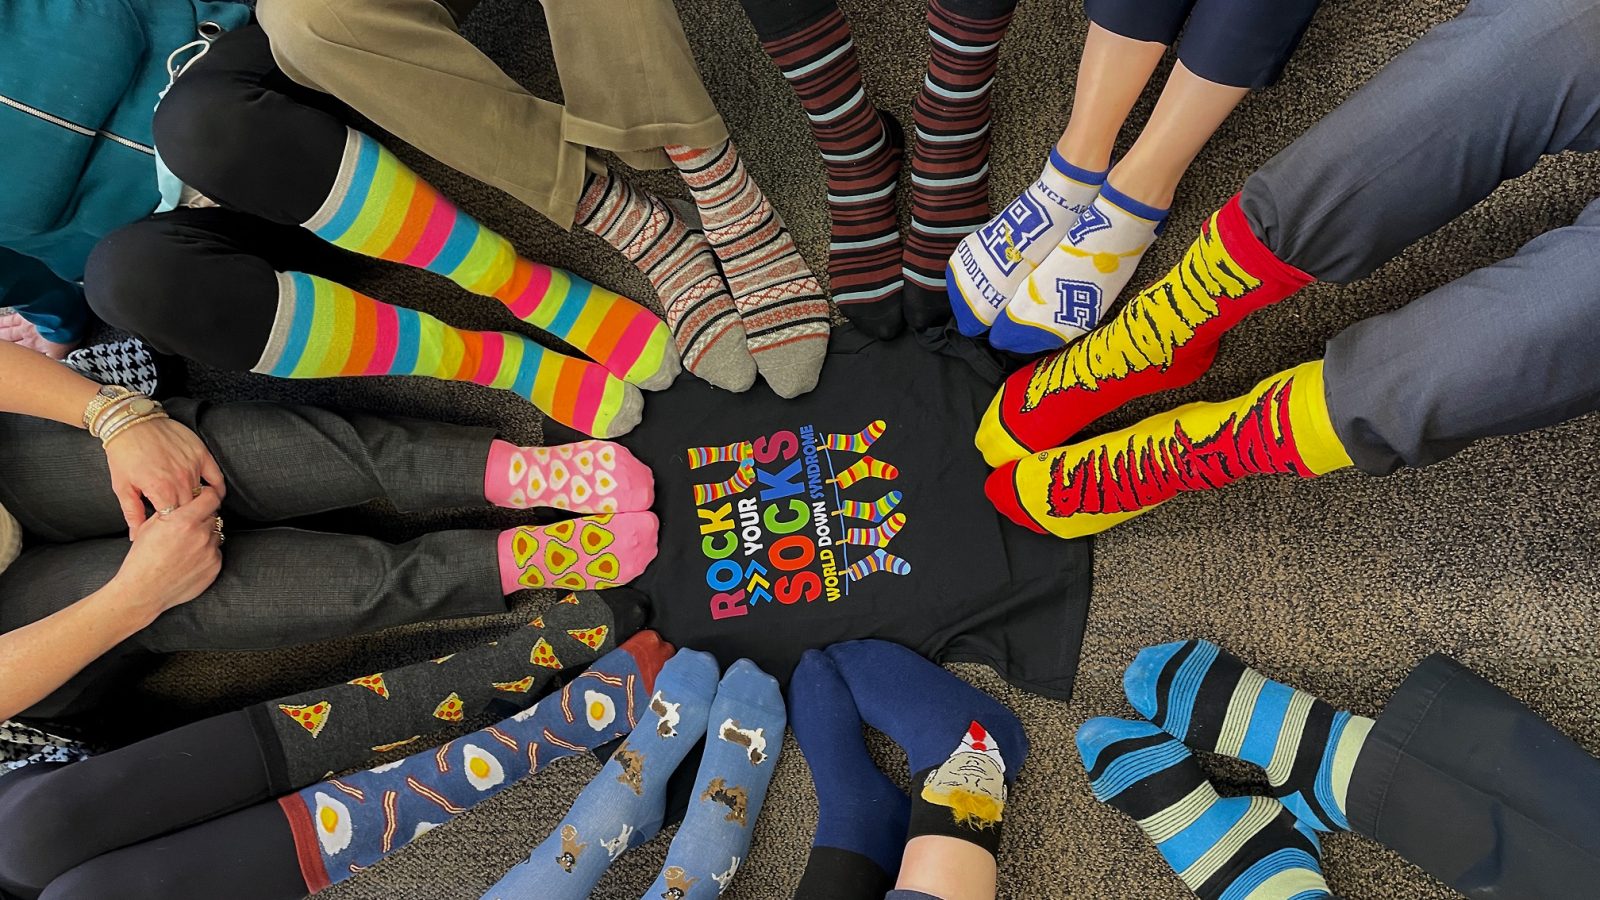 Rock Your Socks for World Down Syndrome Day